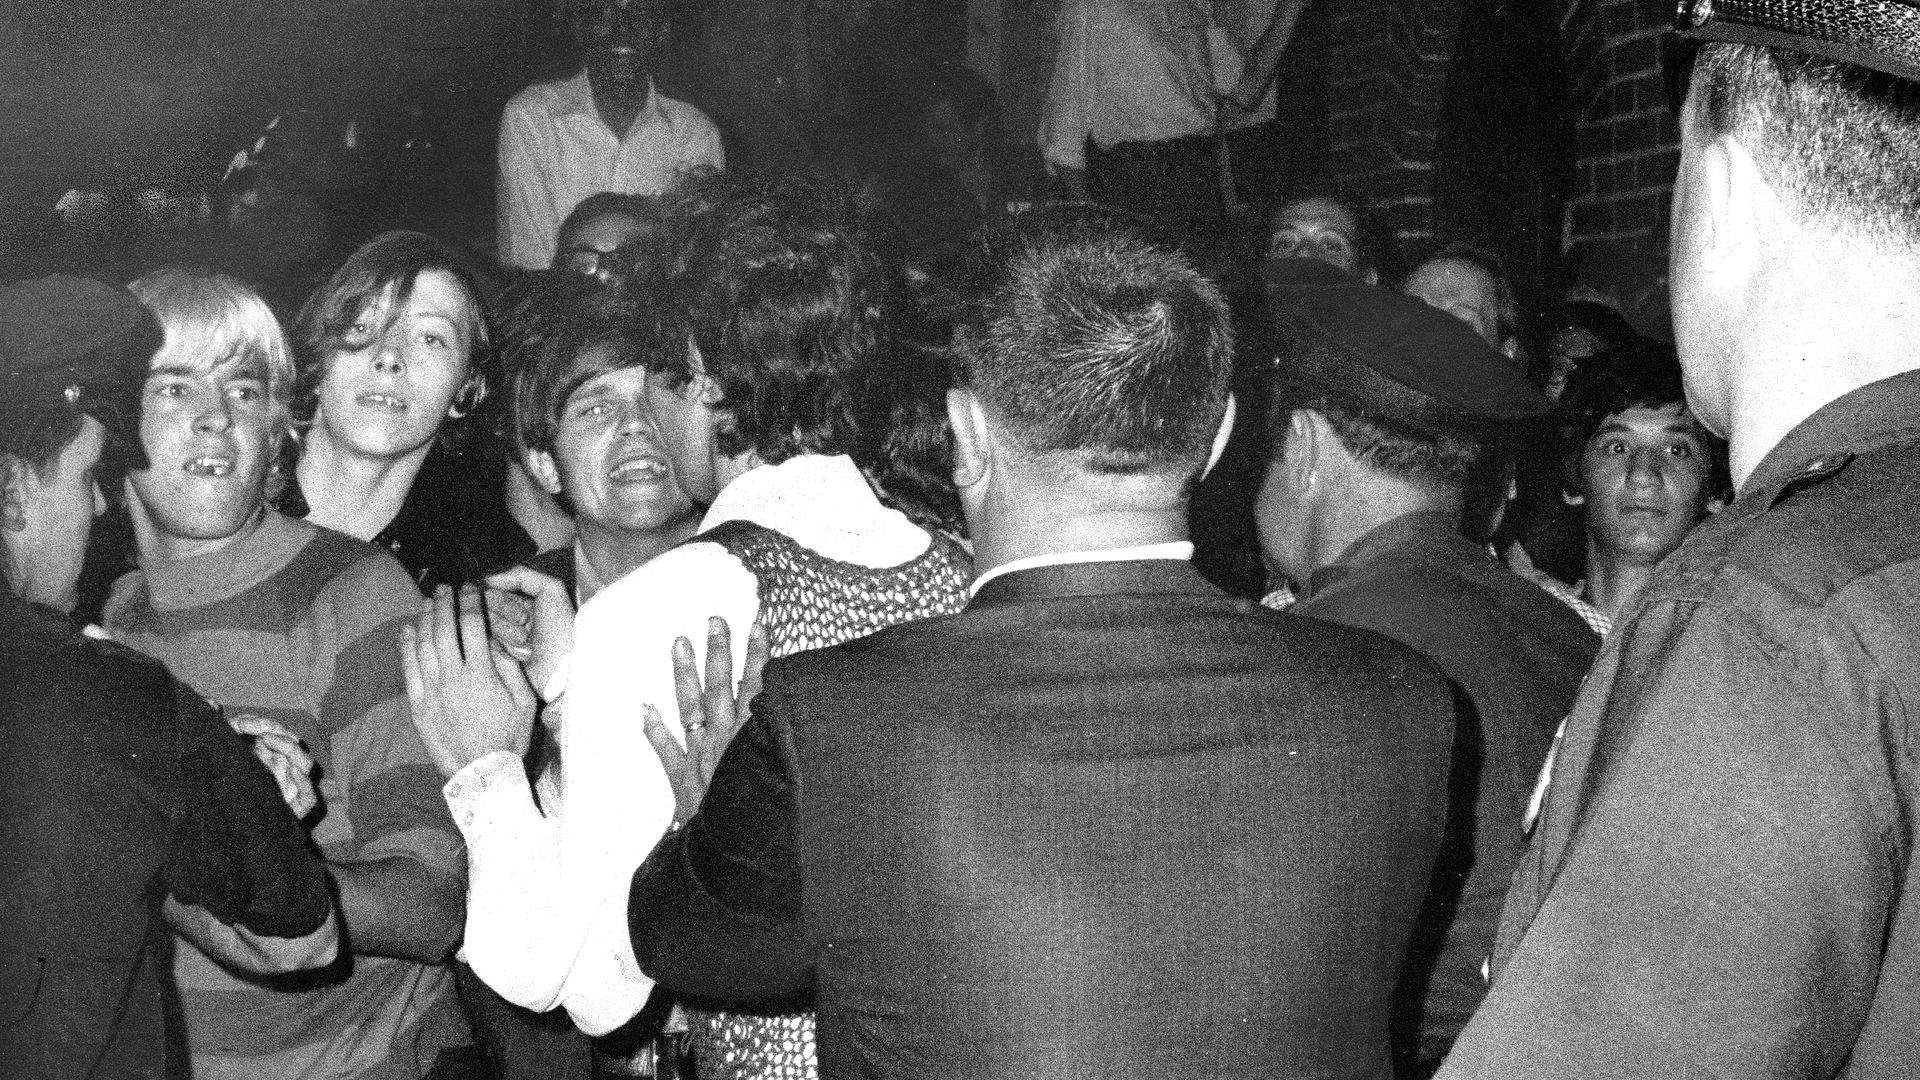 1969 Stonewall Riots in New York City